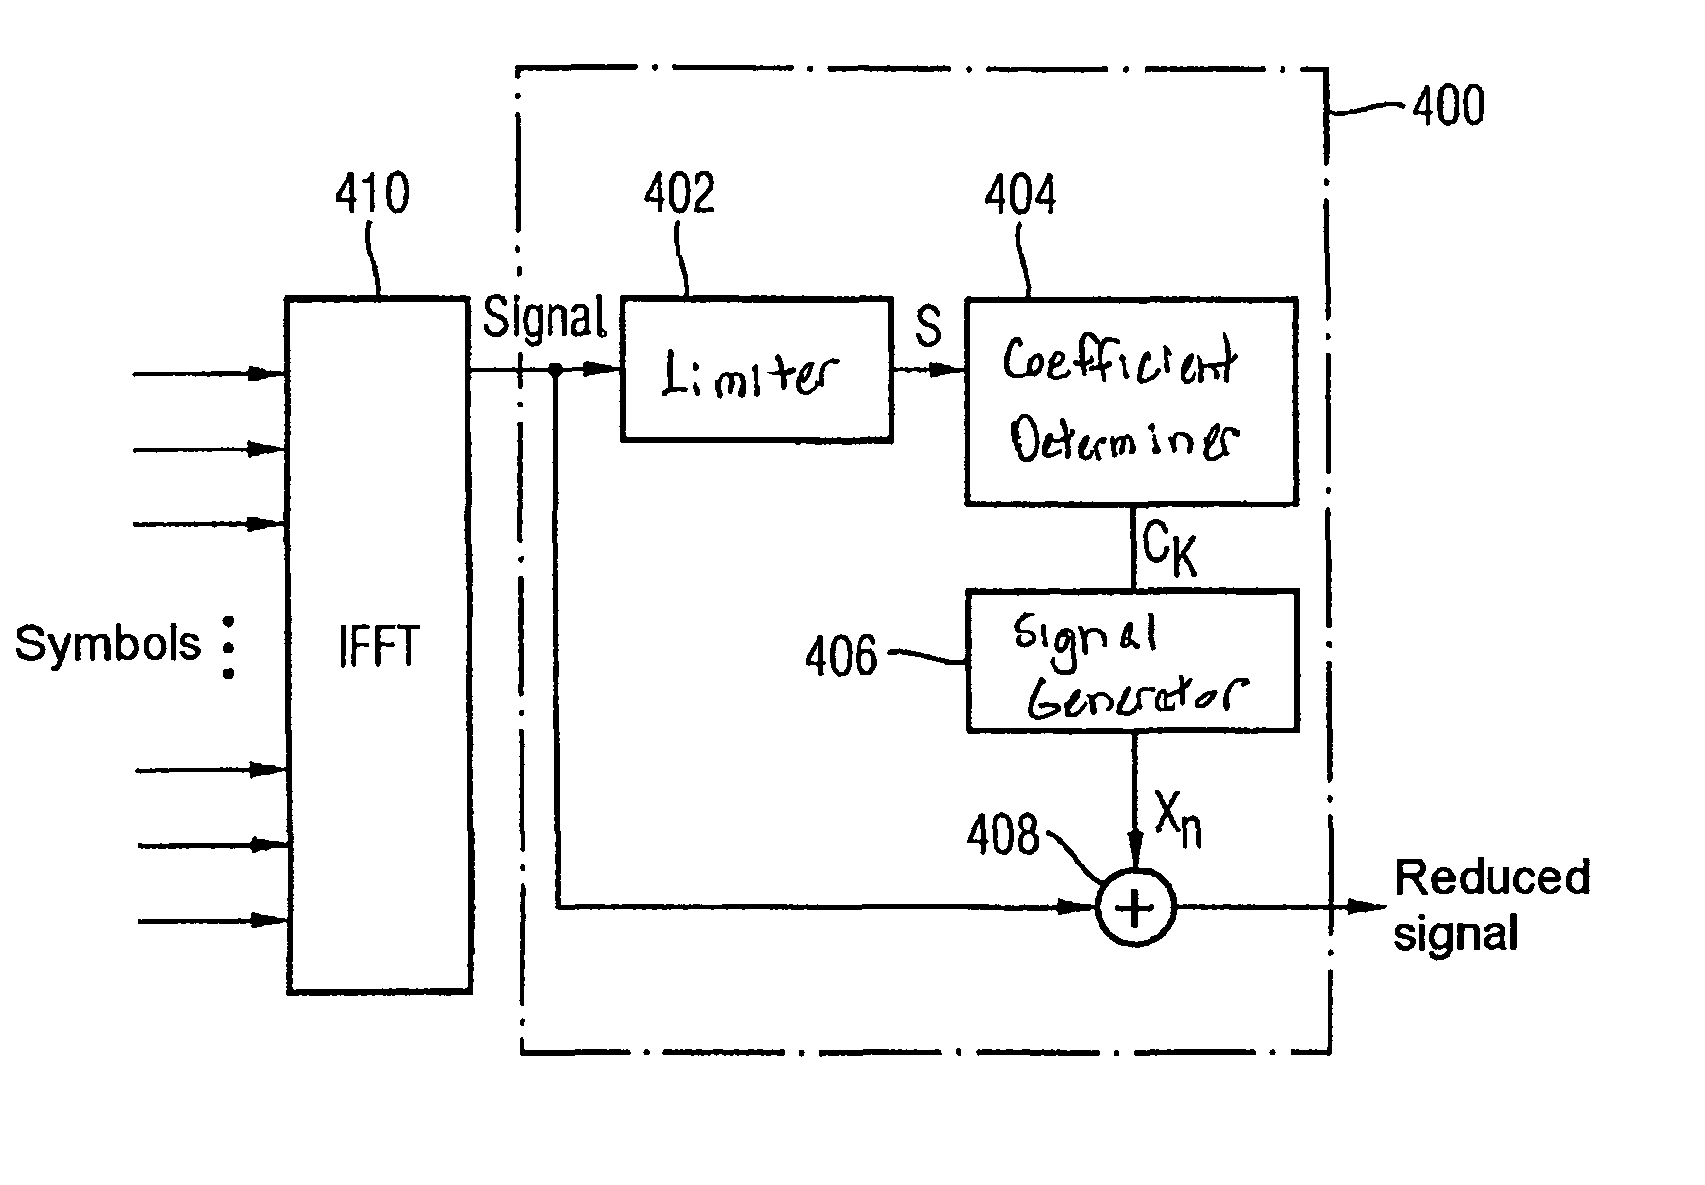 Apparatus and method for producing a signal to reduce the PAR in a multicarrier system